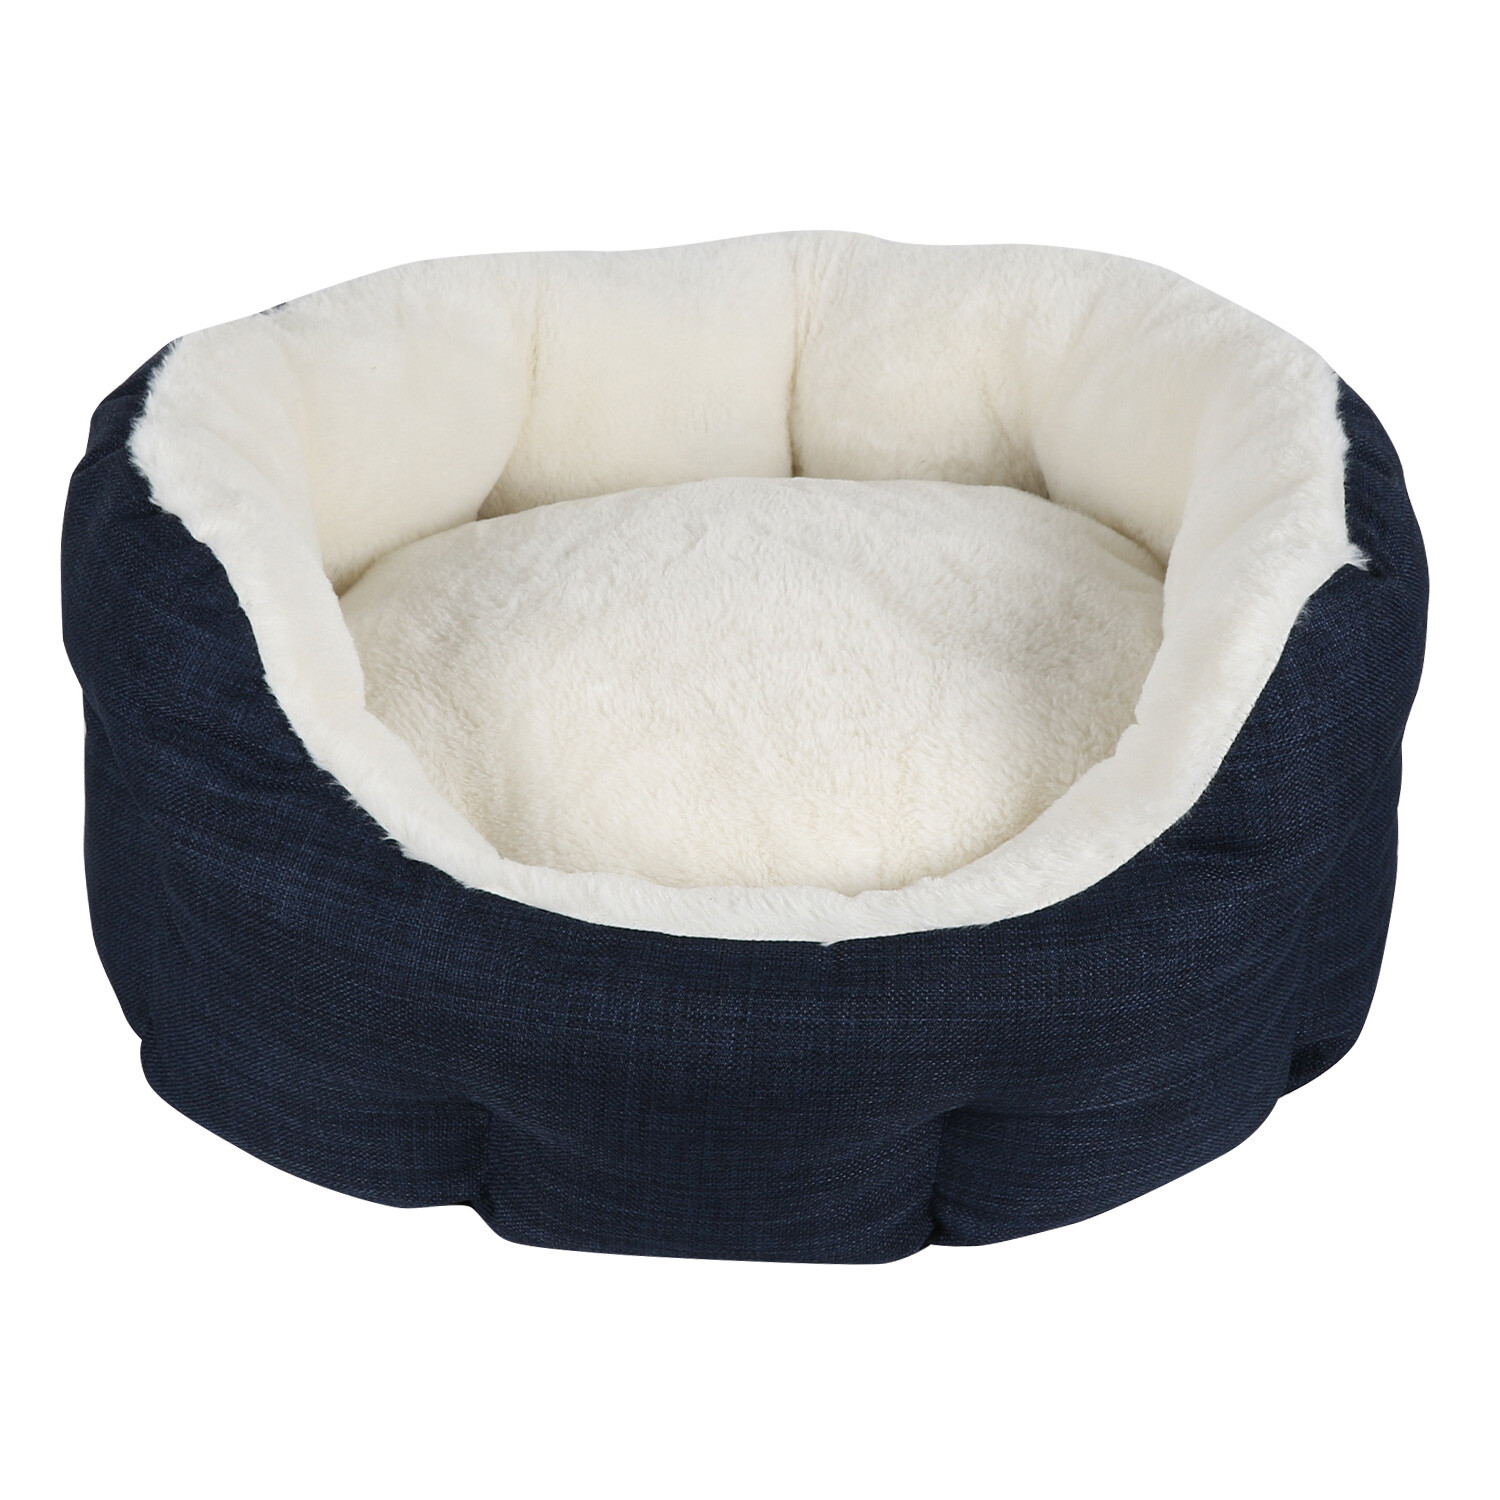 Clever Paws Luxury Small Navy Pet Bed Image 2